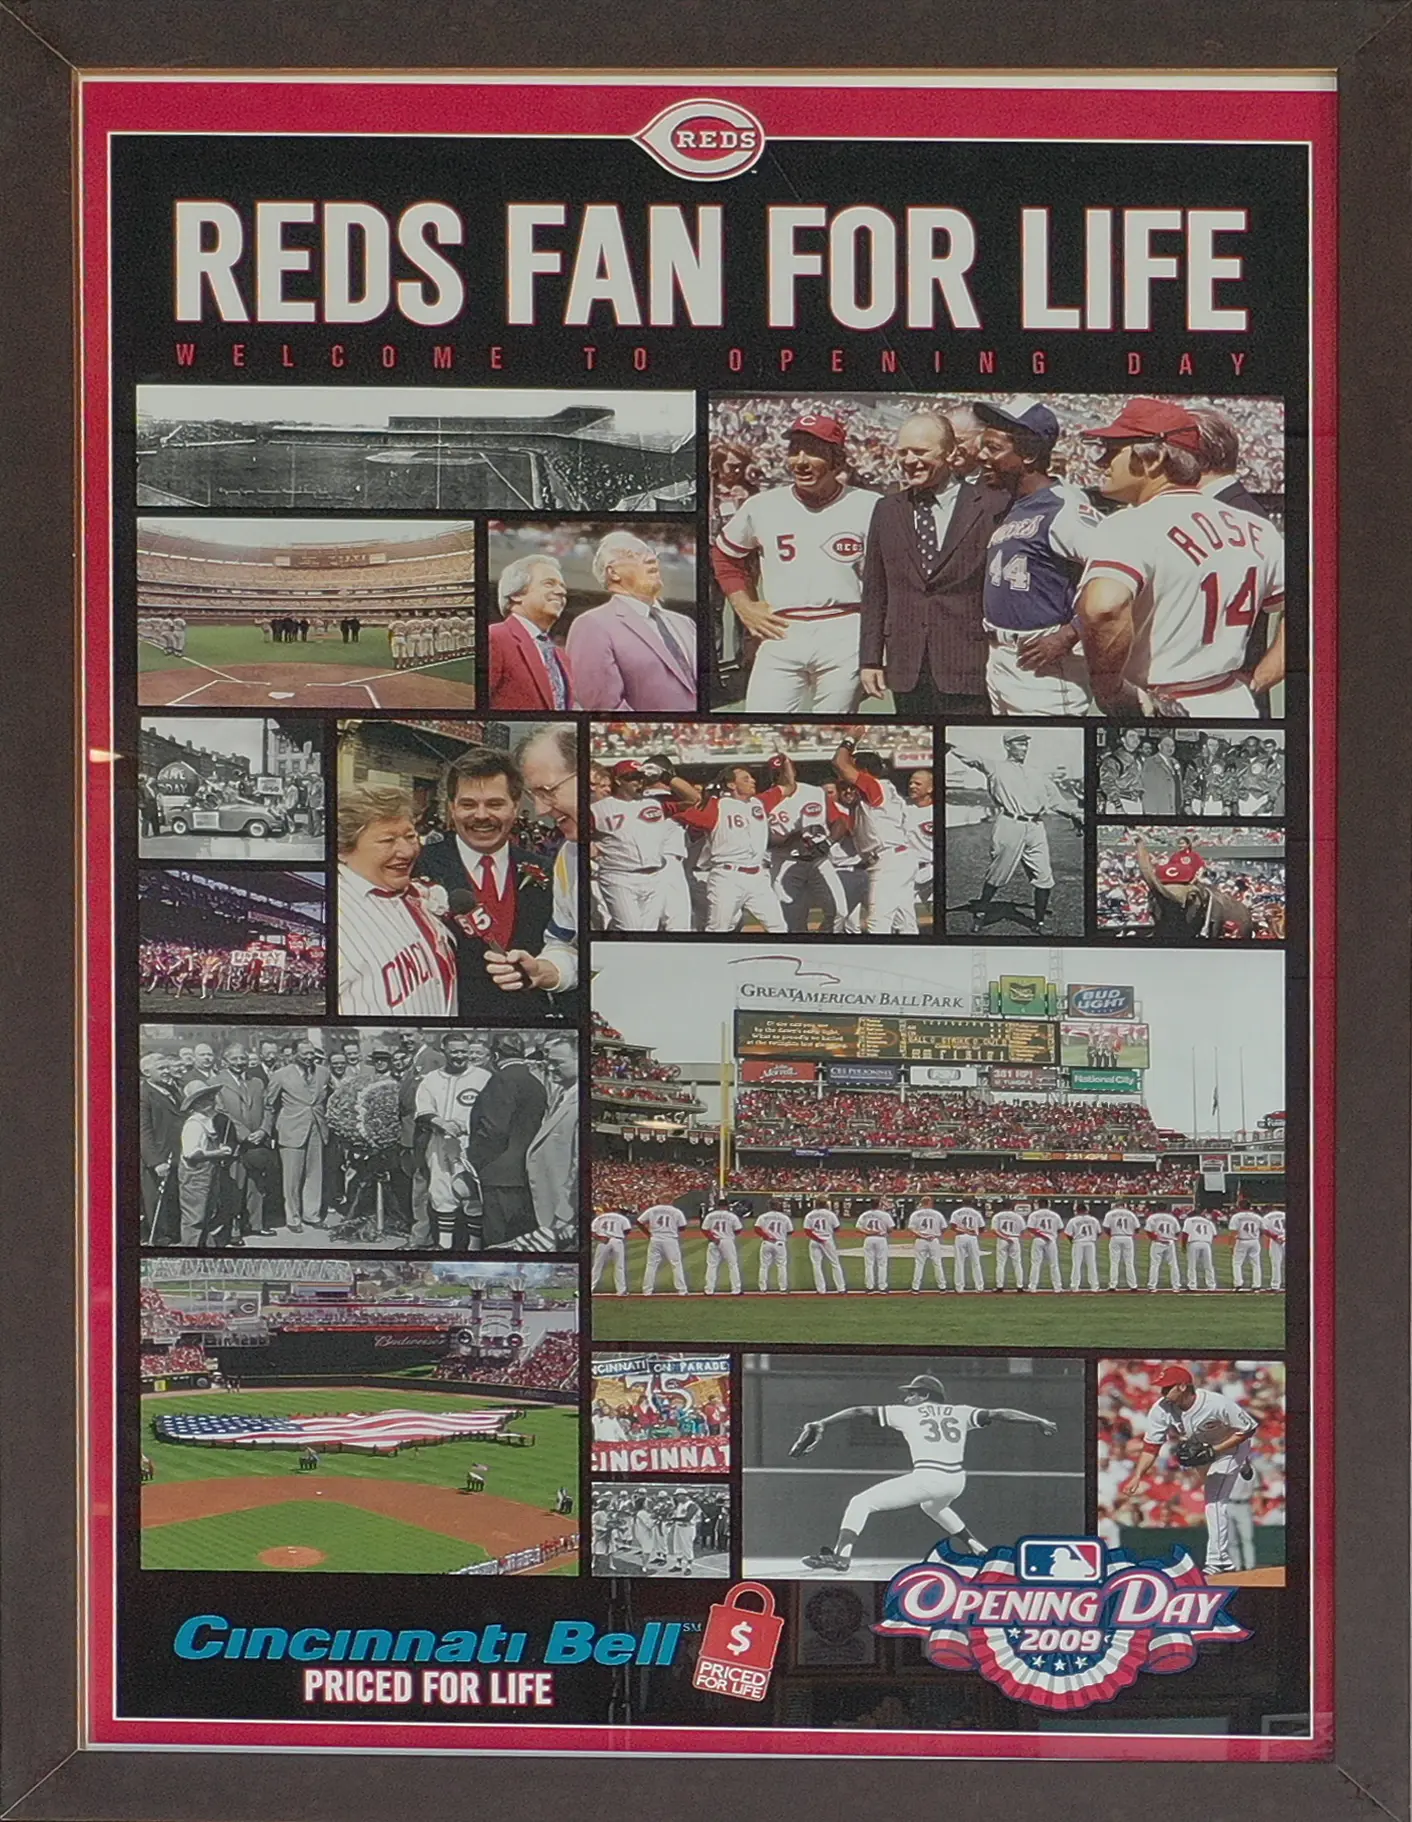 Sparky Who? Reds fans sure know today - Redleg Nation